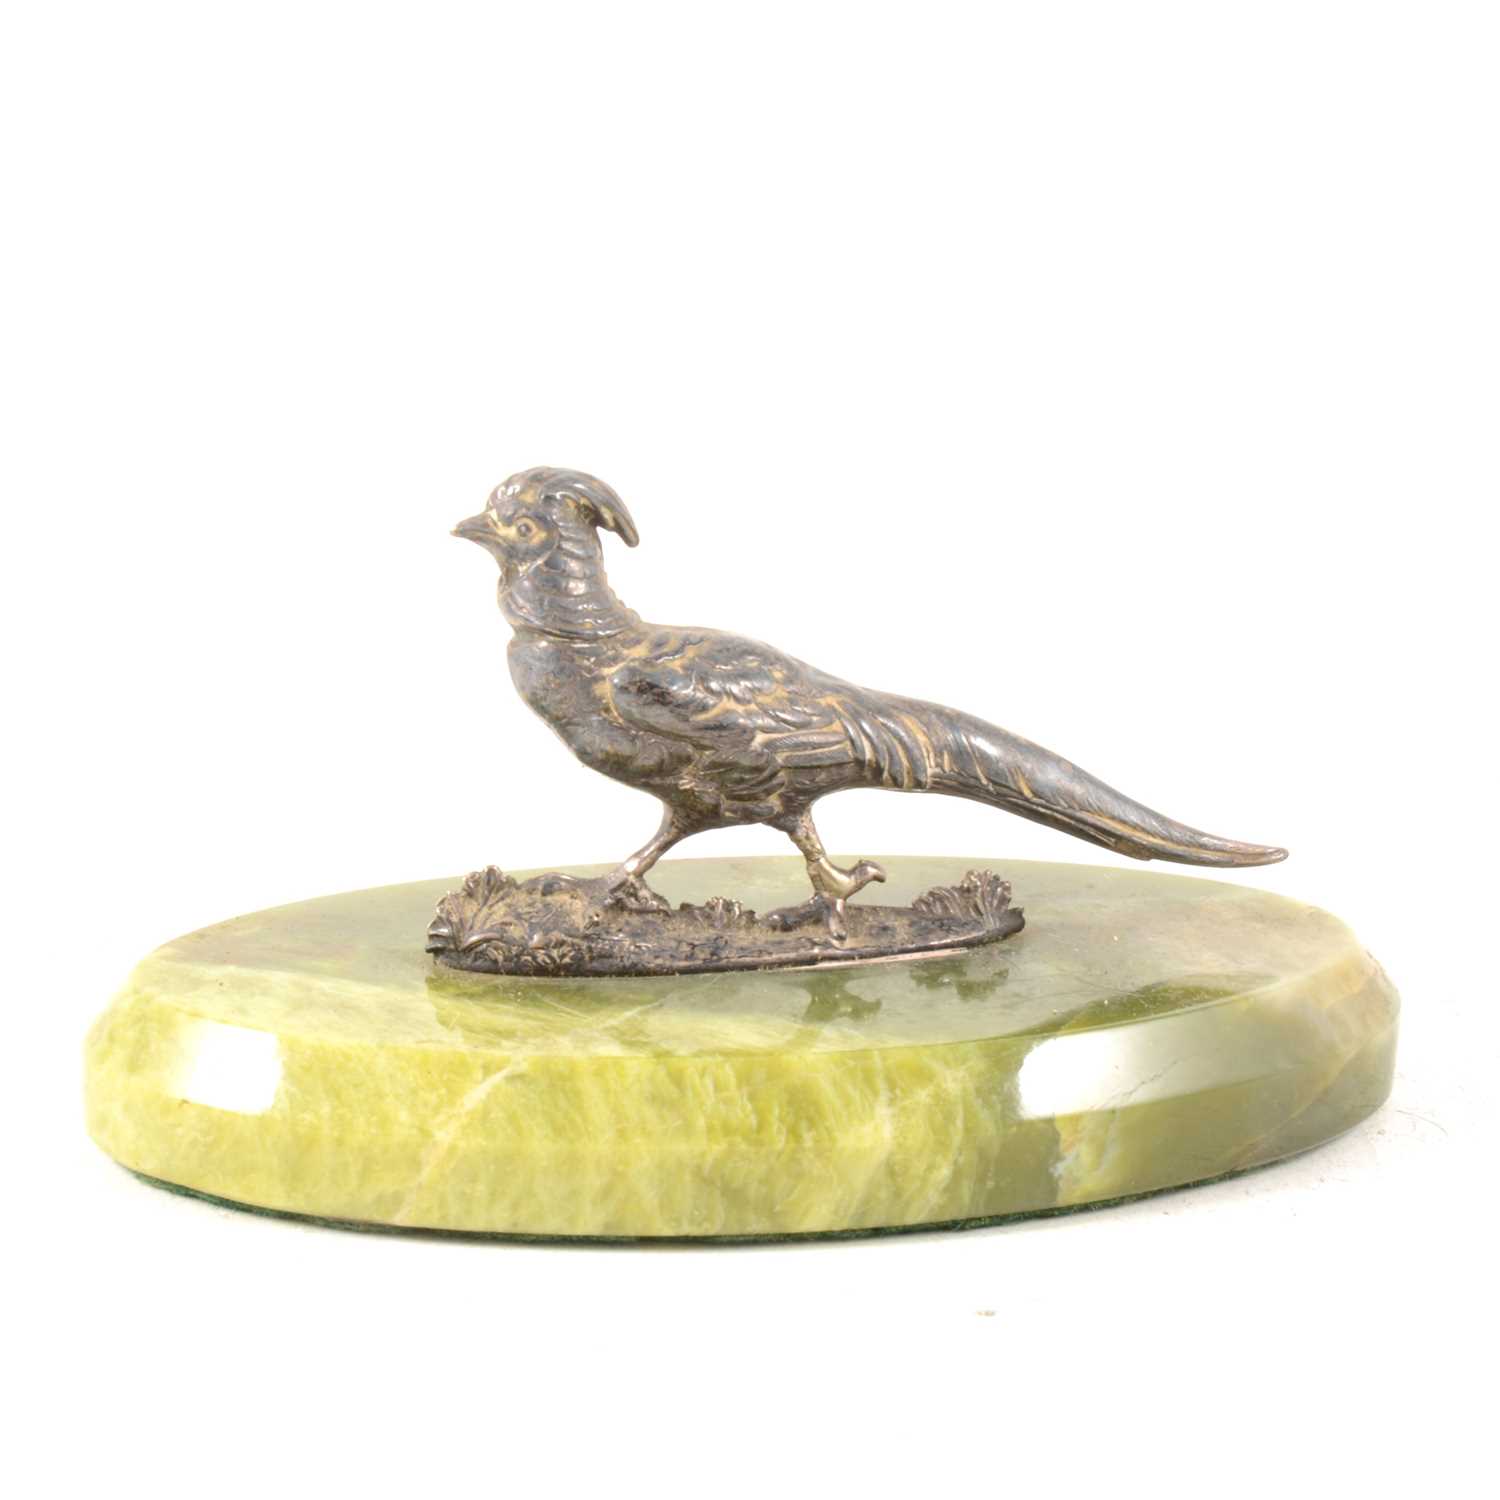 Lot 134 - Silver Pheasant paperweight with onyx base. S.M. London 1897.